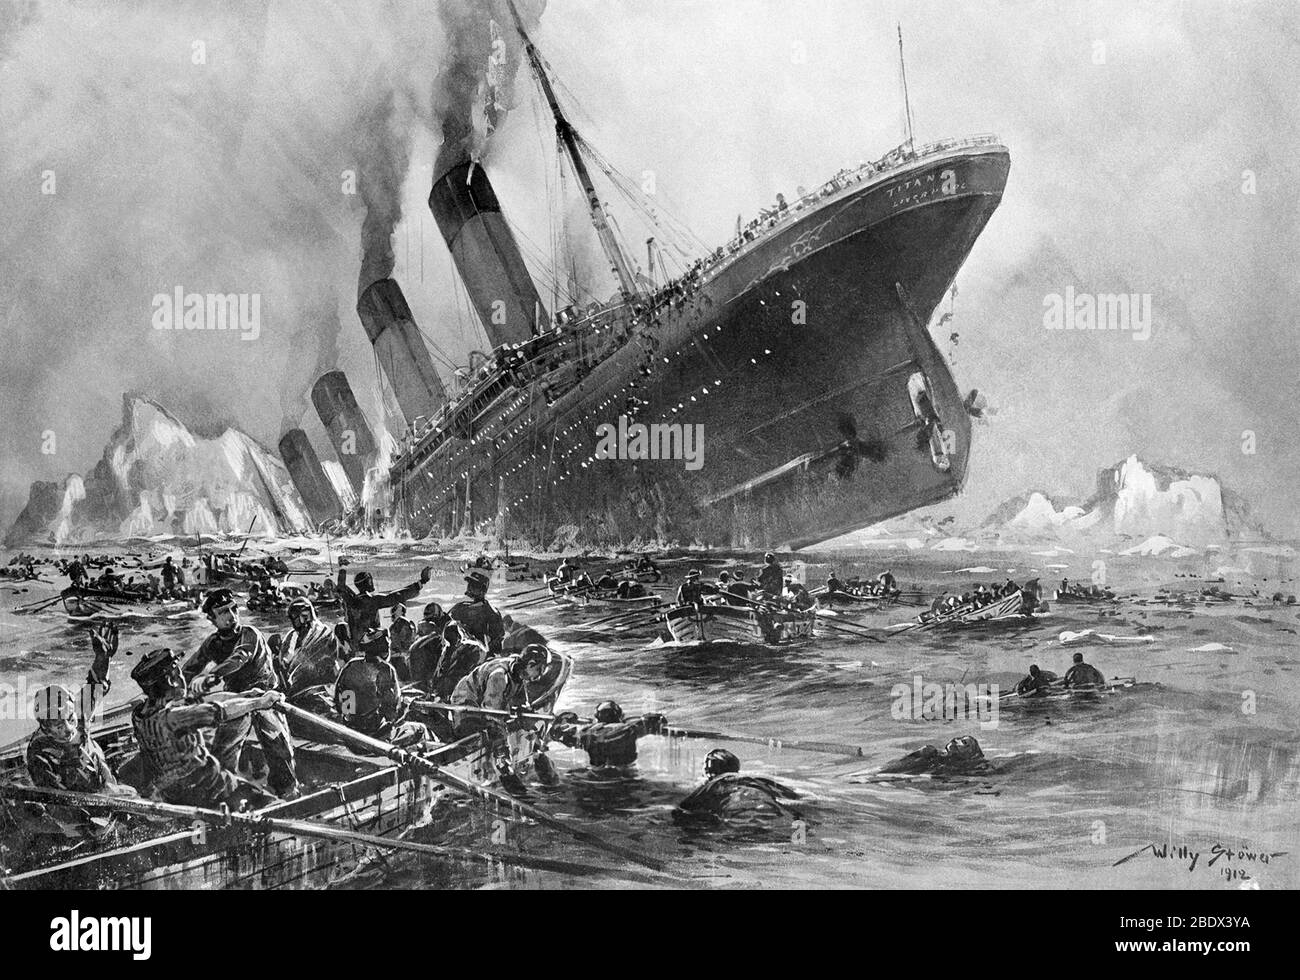 Sinking Titanic RMS, 1912 Banque D'Images